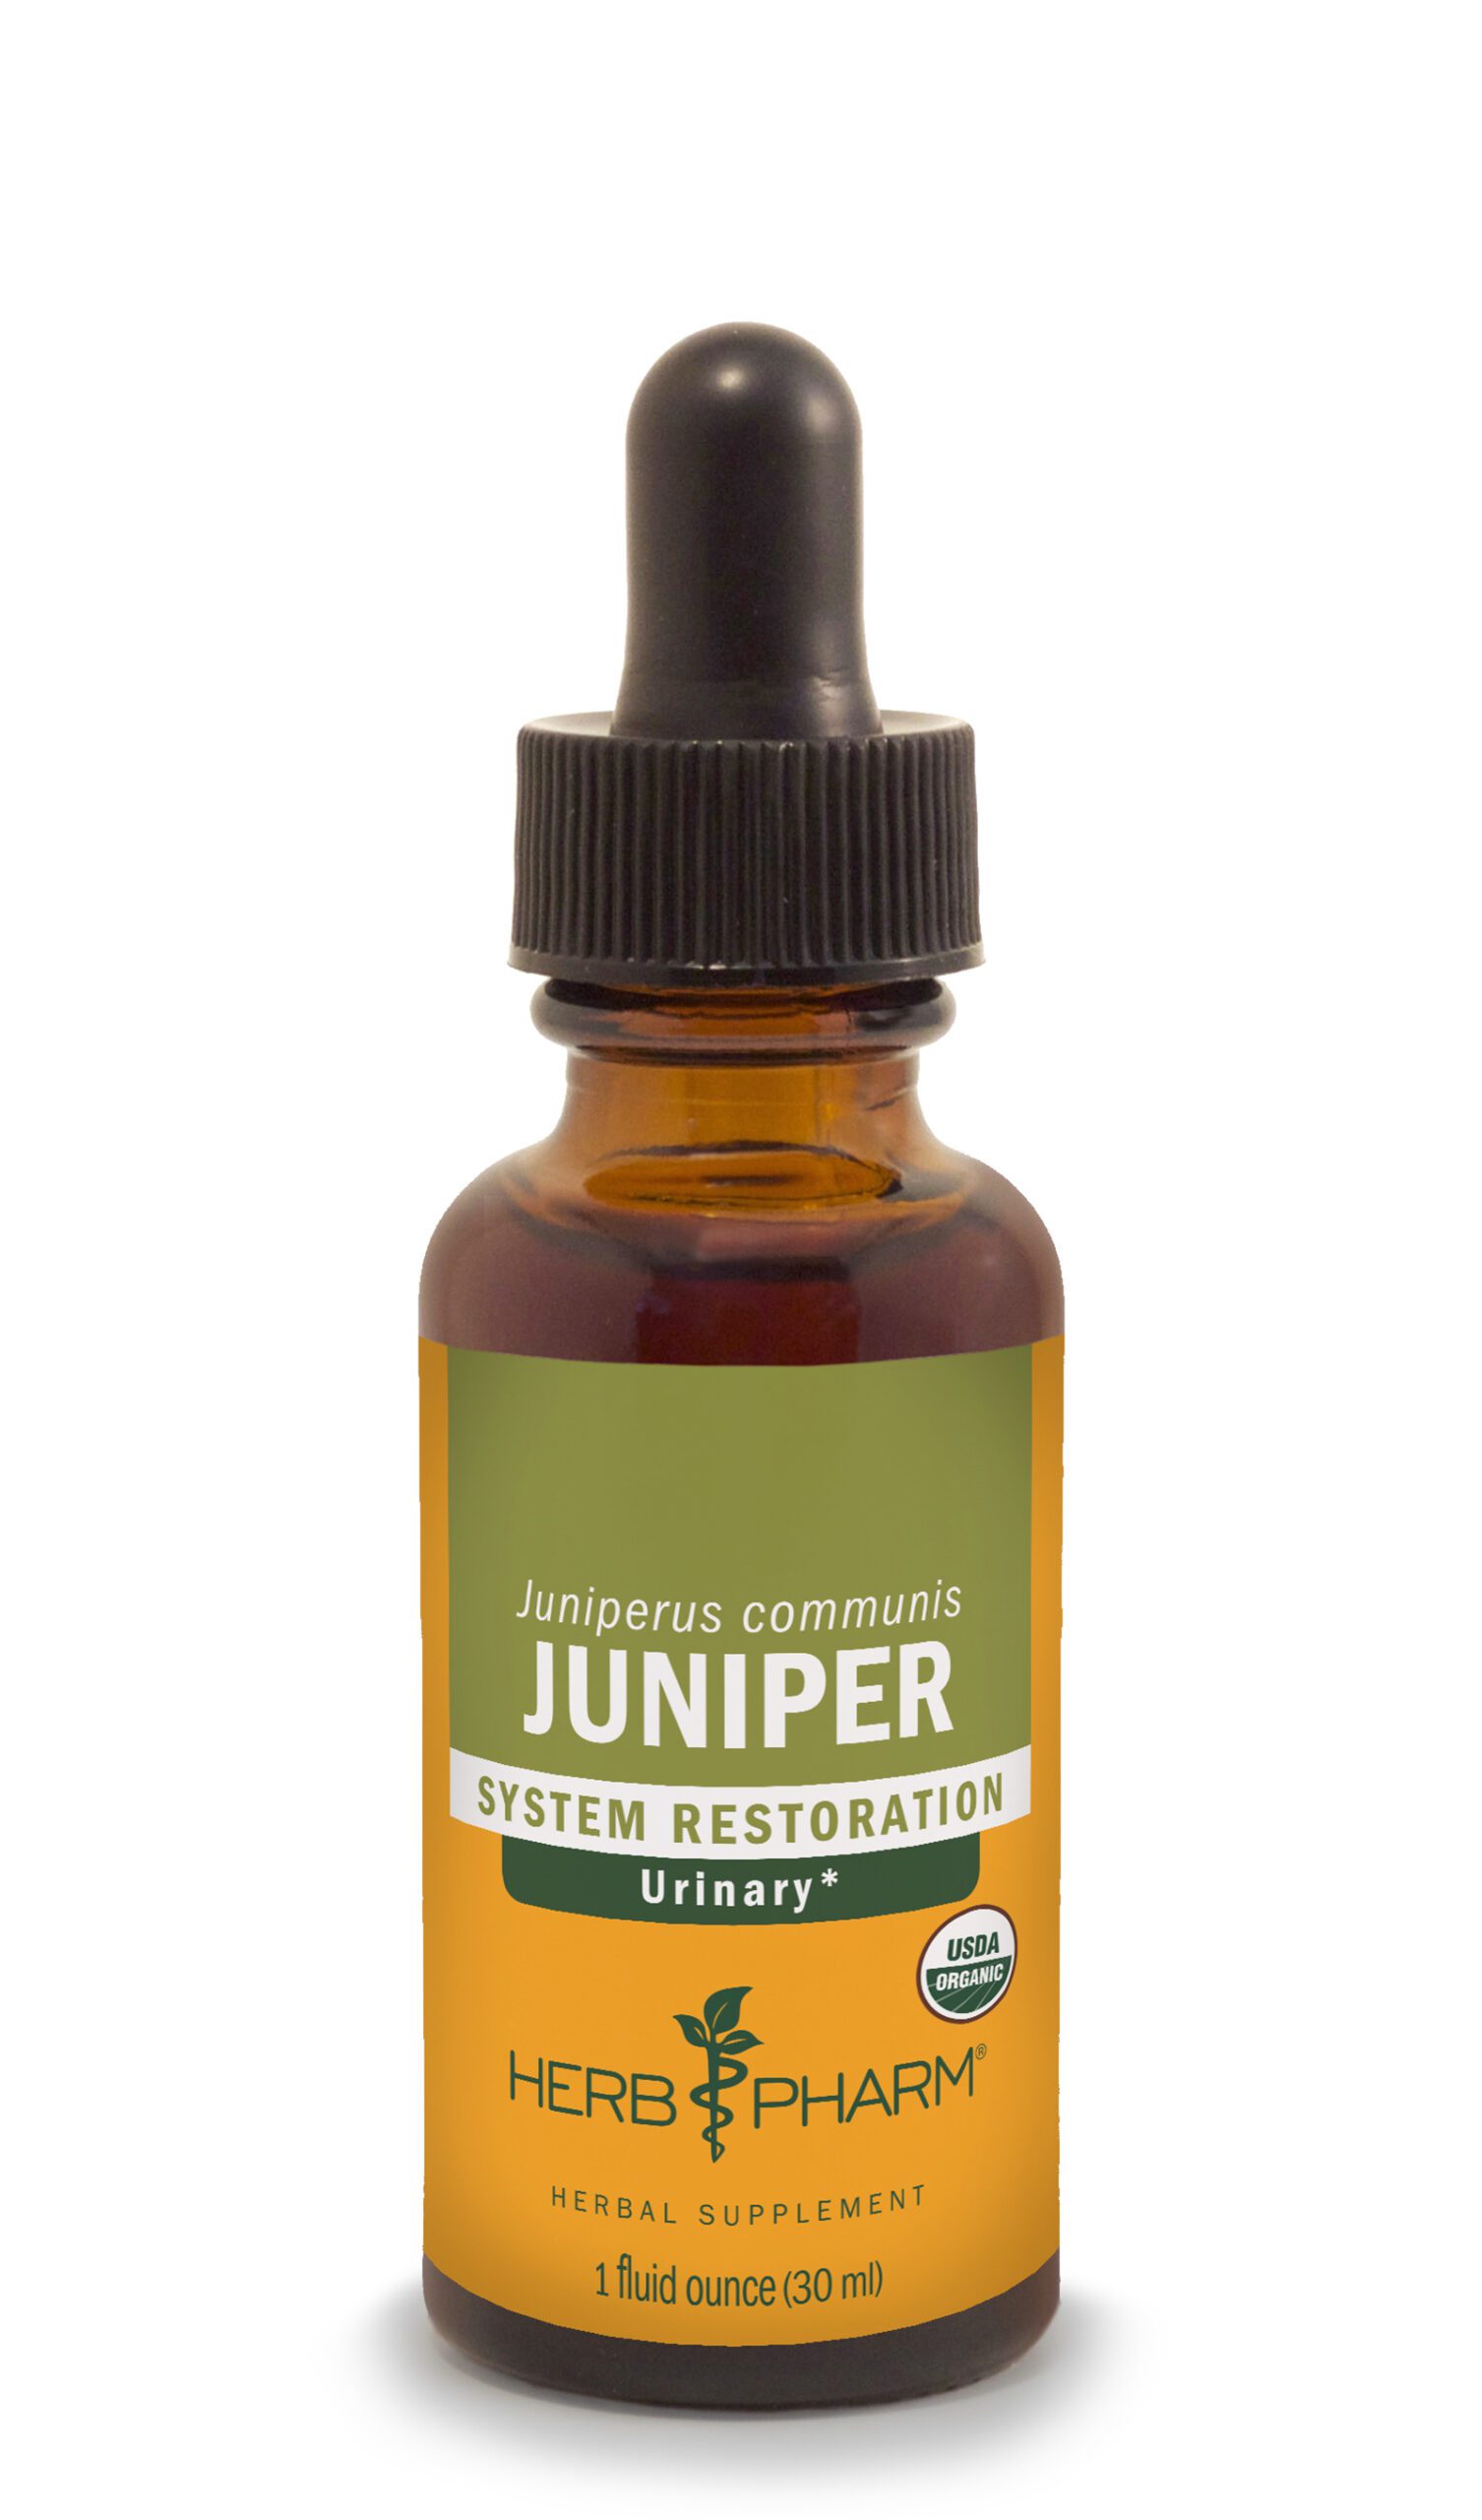 Product Listing Image for Herb Pharm Juniper Tincture 1oz